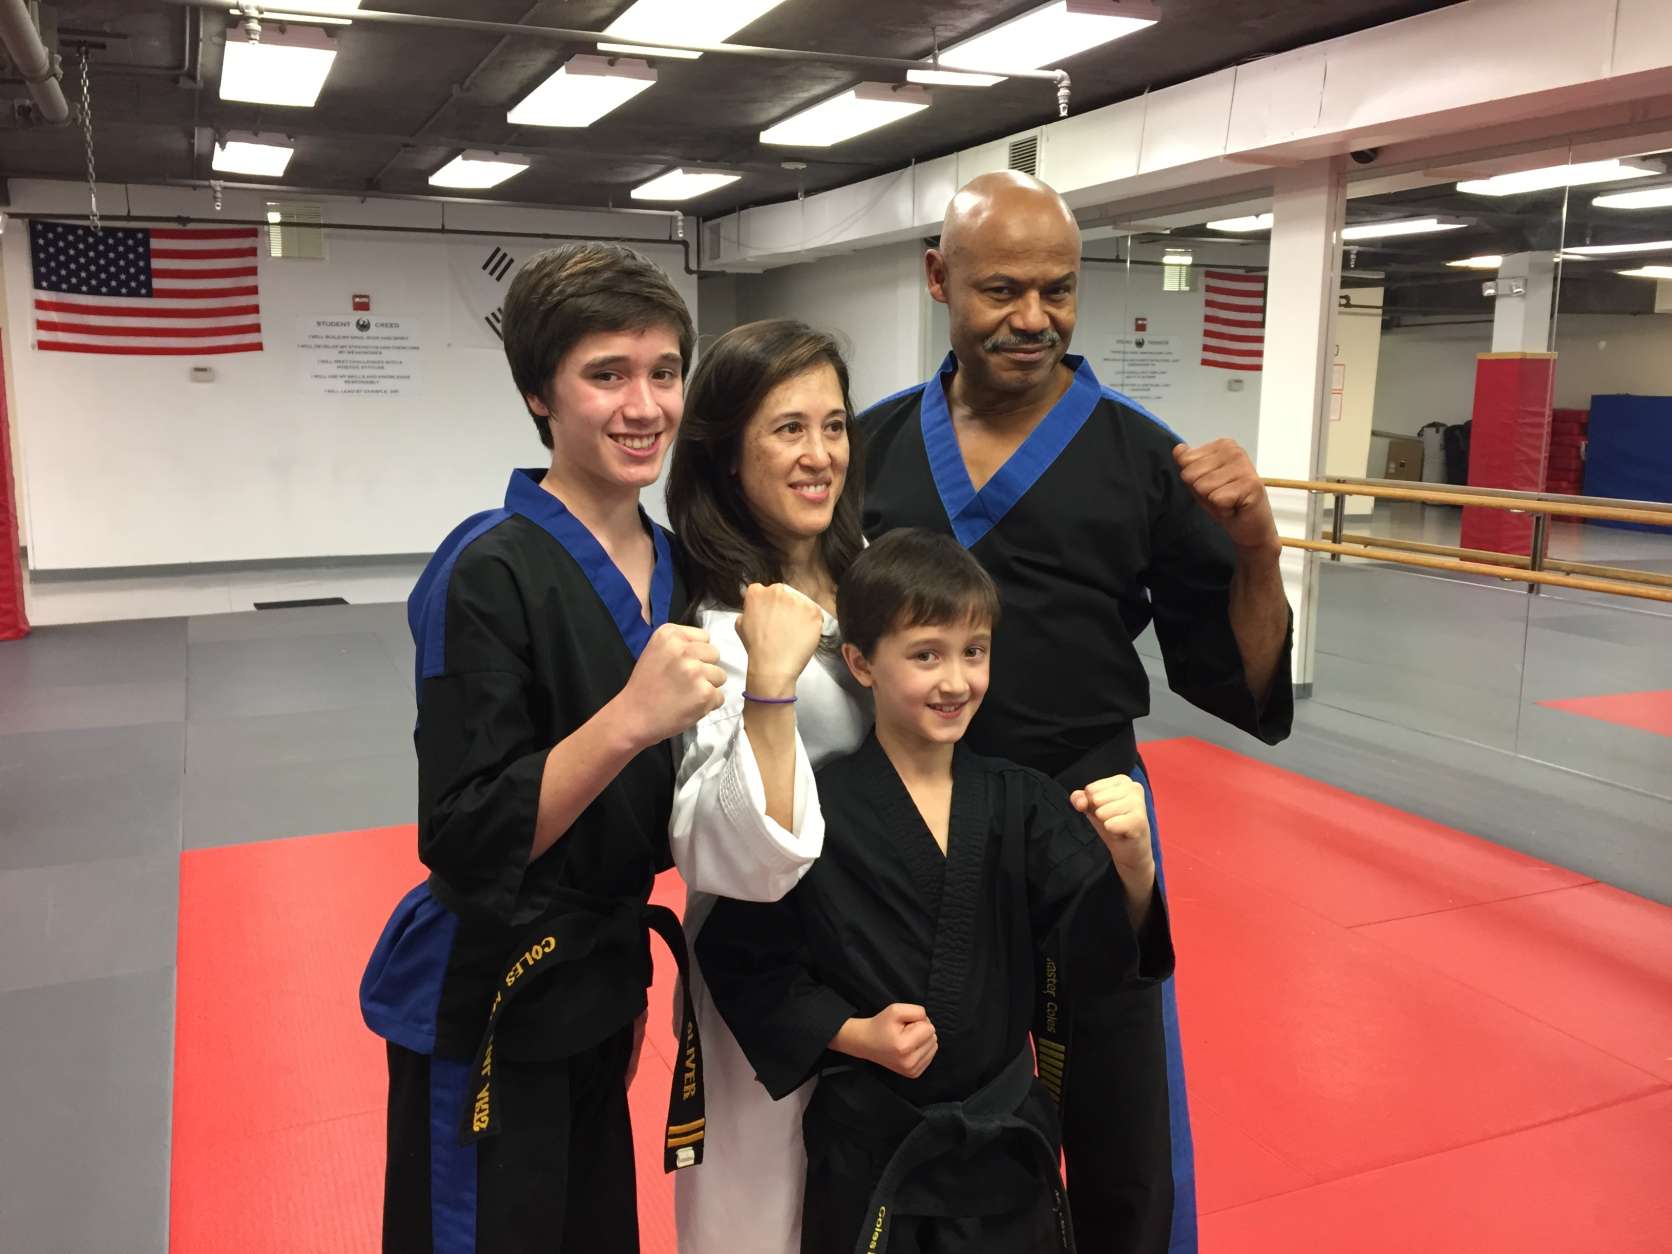 Melissa Marquez and her sons pose with Master Michael Coles of Coles Martial Arts Academy in Bethesda, Md. (WTOP/Michelle Basch)